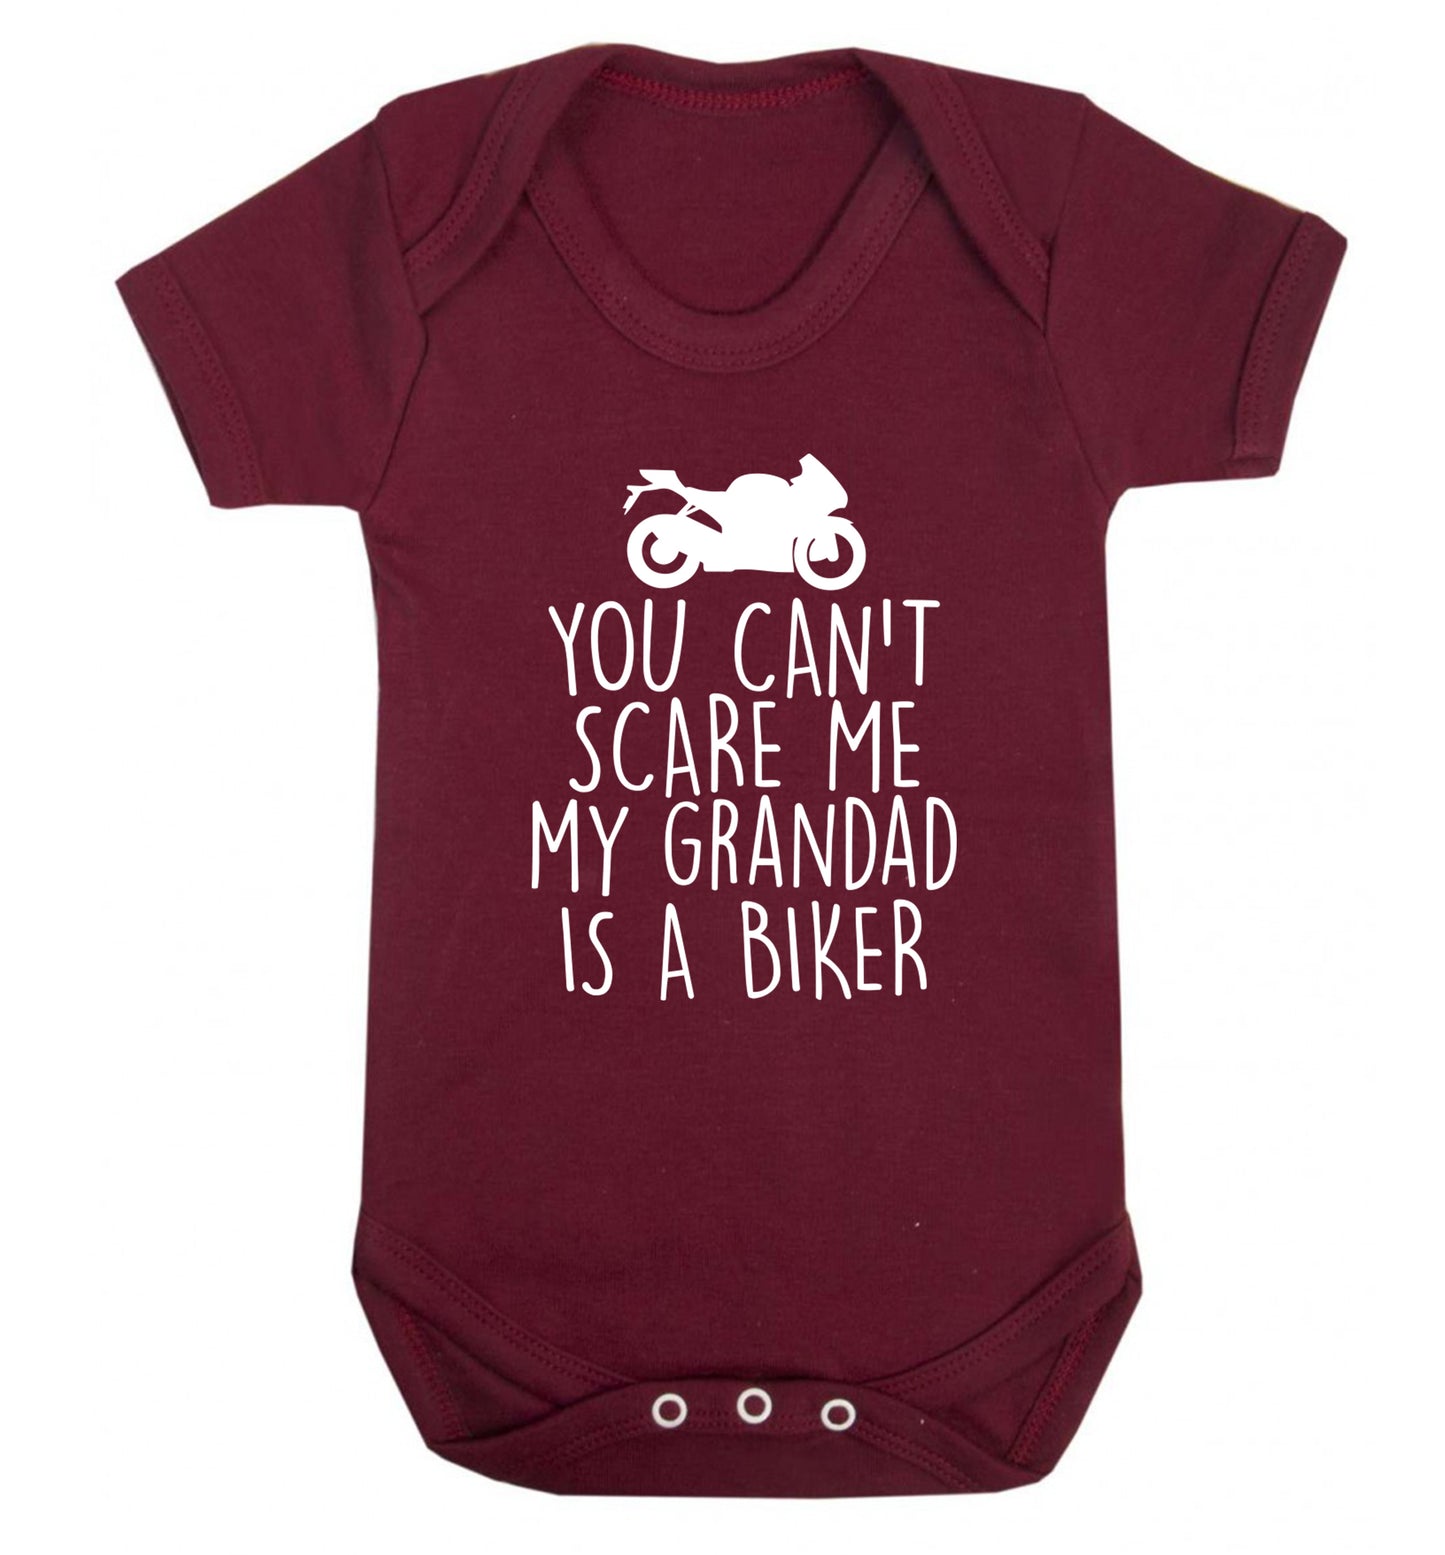 You can't scare me my grandad is a biker Baby Vest maroon 18-24 months